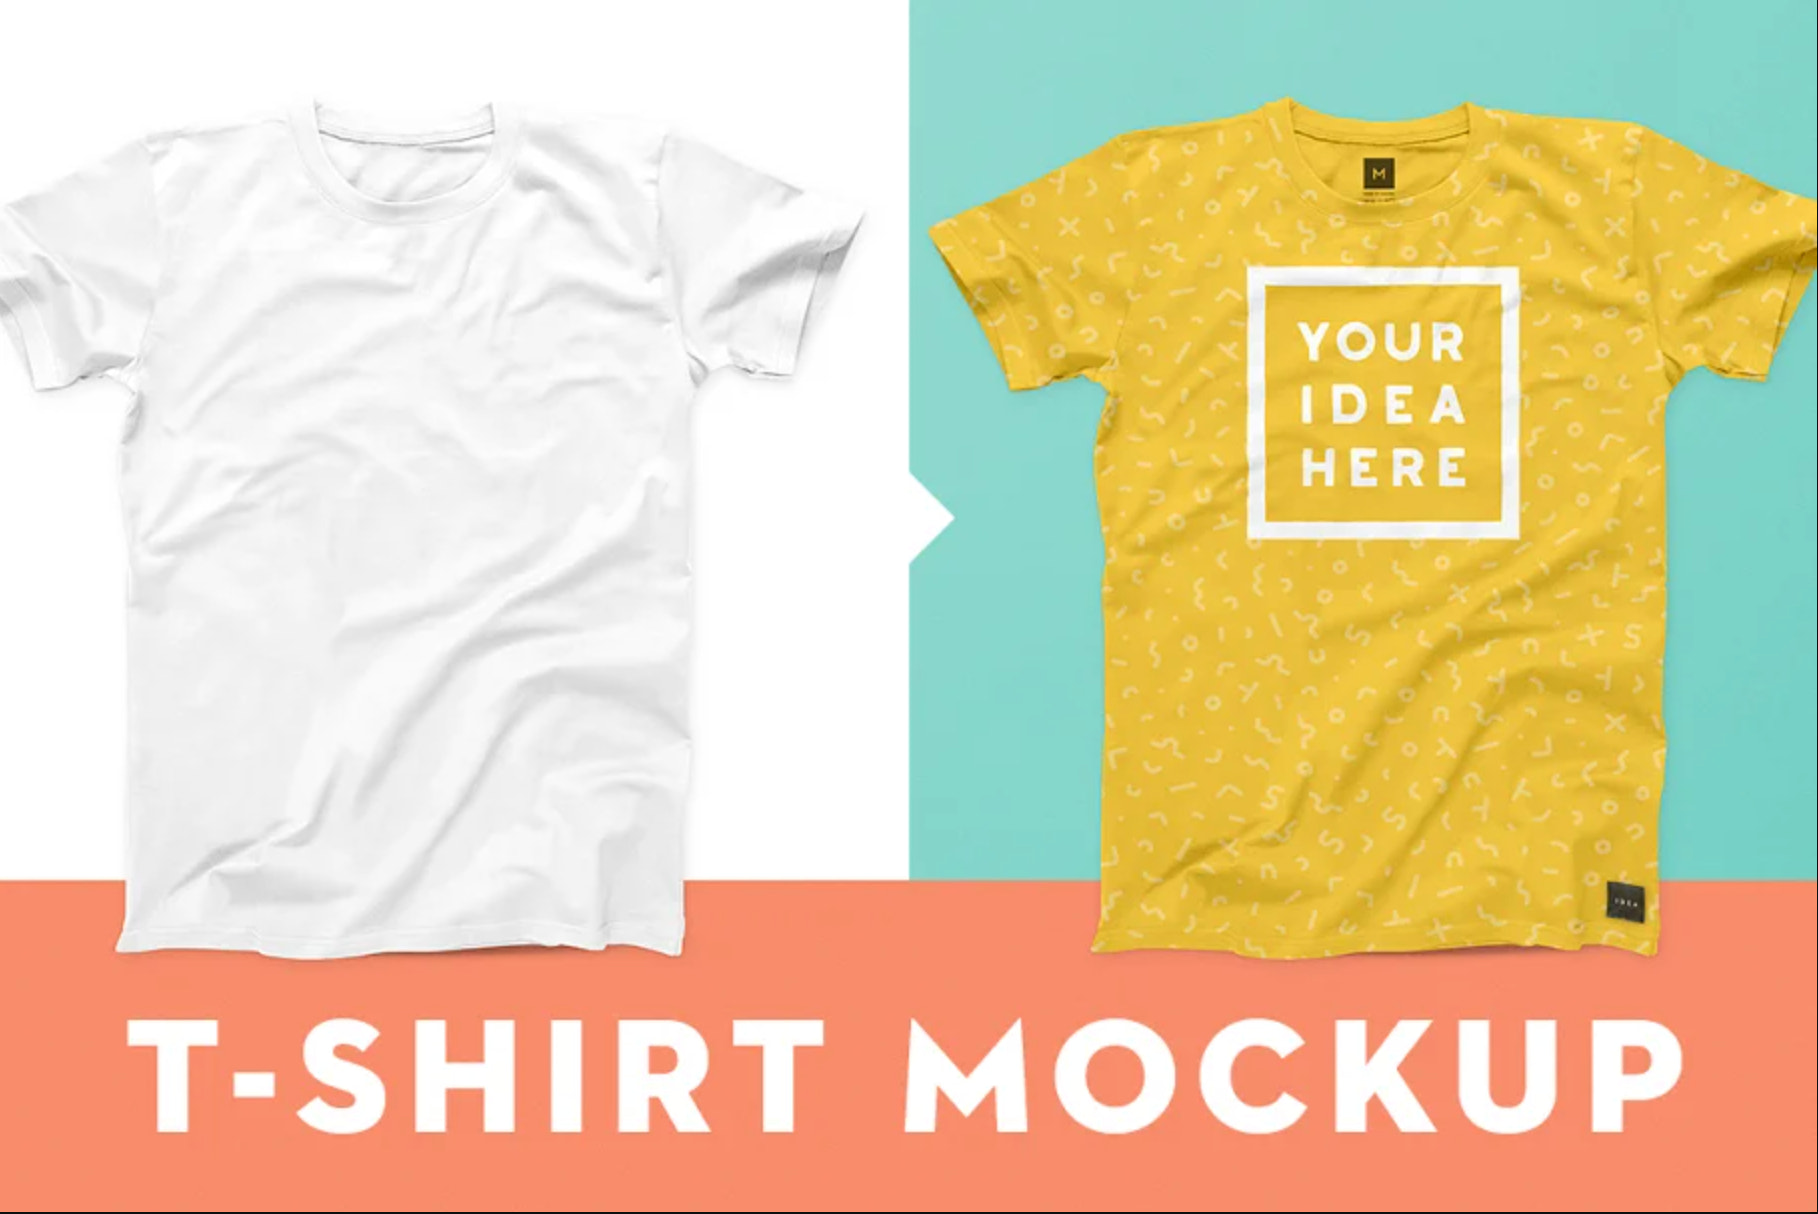 62 T-Shirt Mockups - Promote Your T-Shirt Business